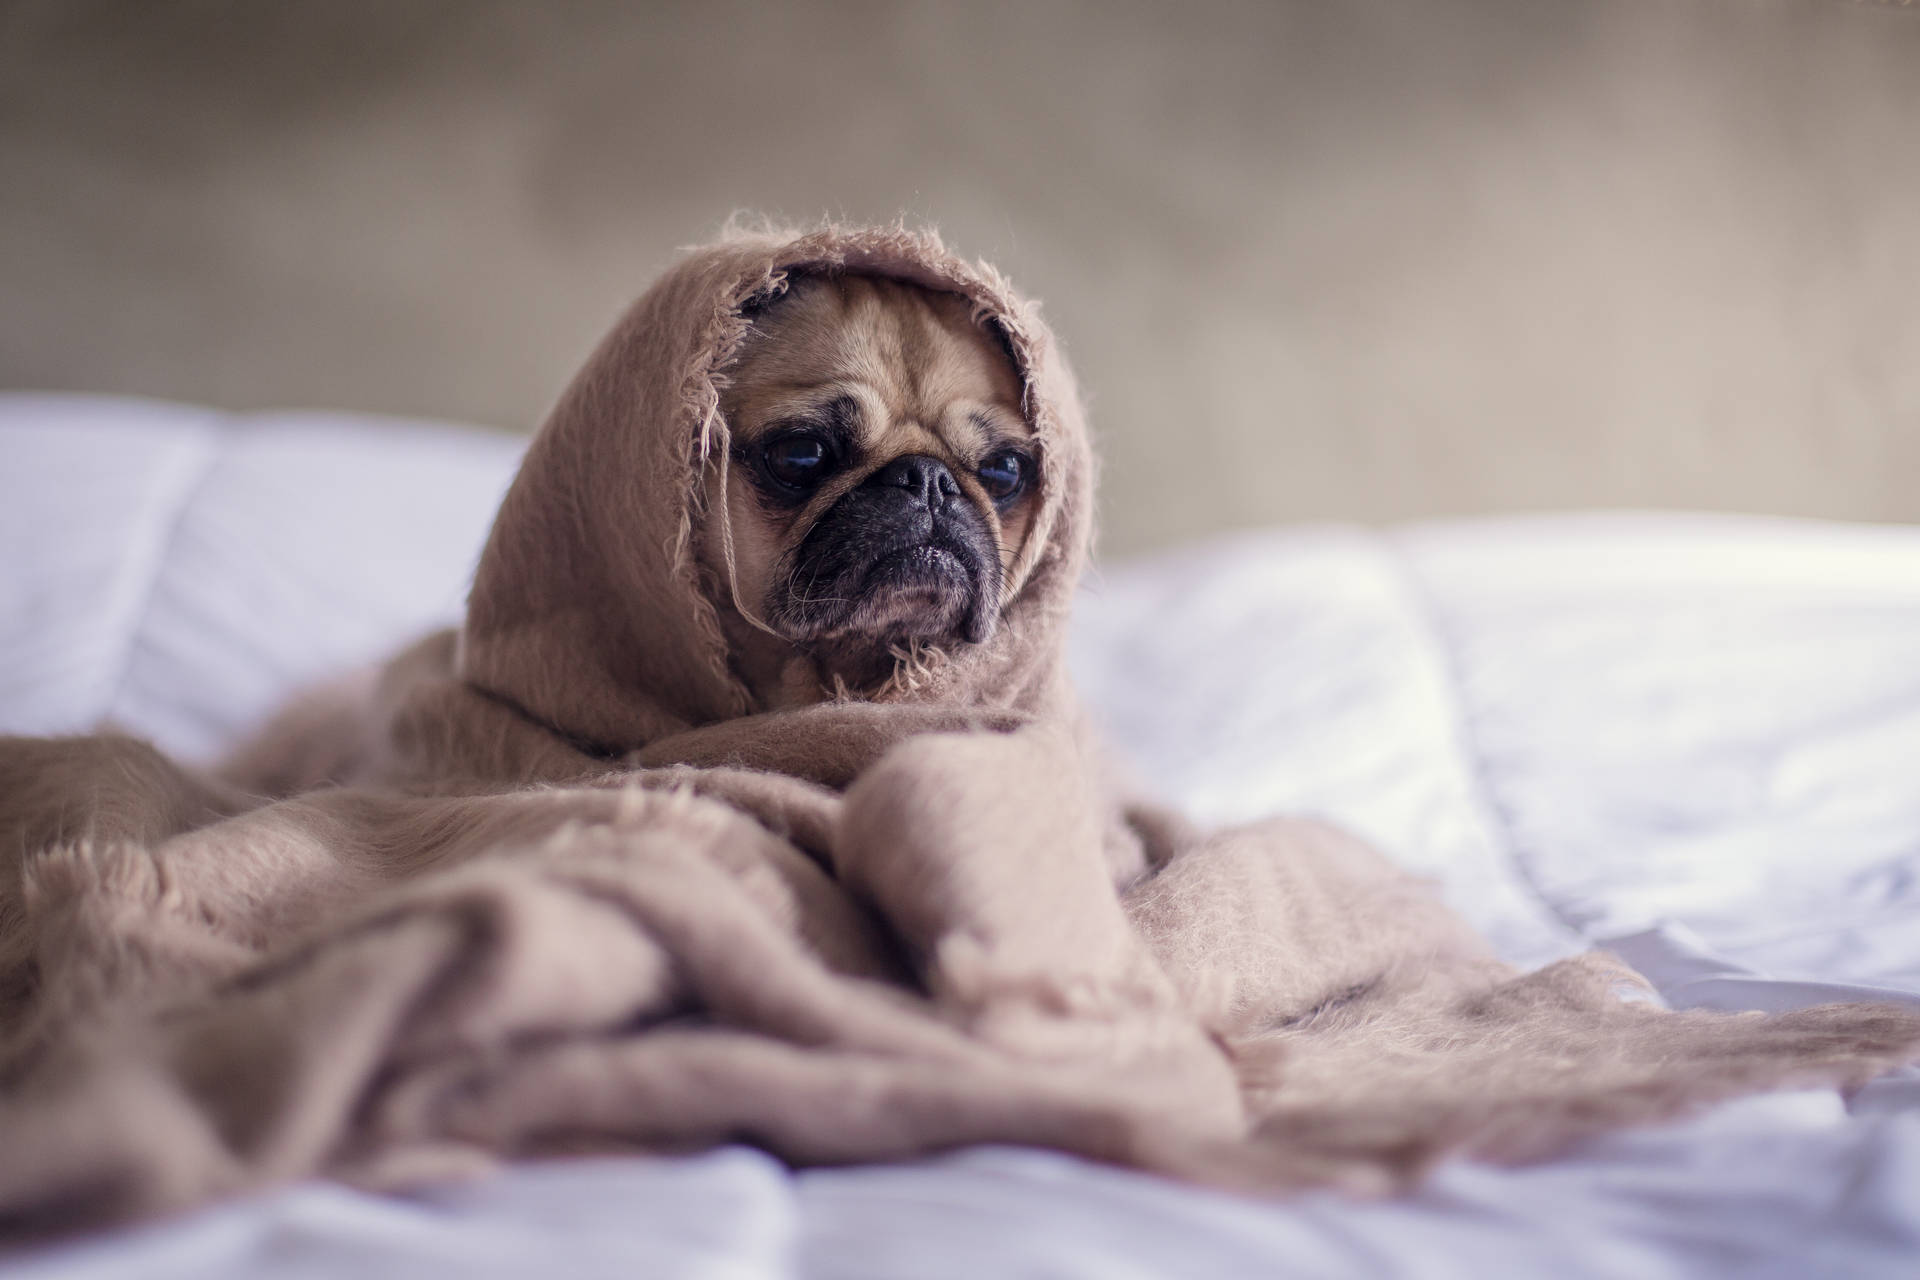 A cozy pug dog snuggled up in a blanket Wallpaper